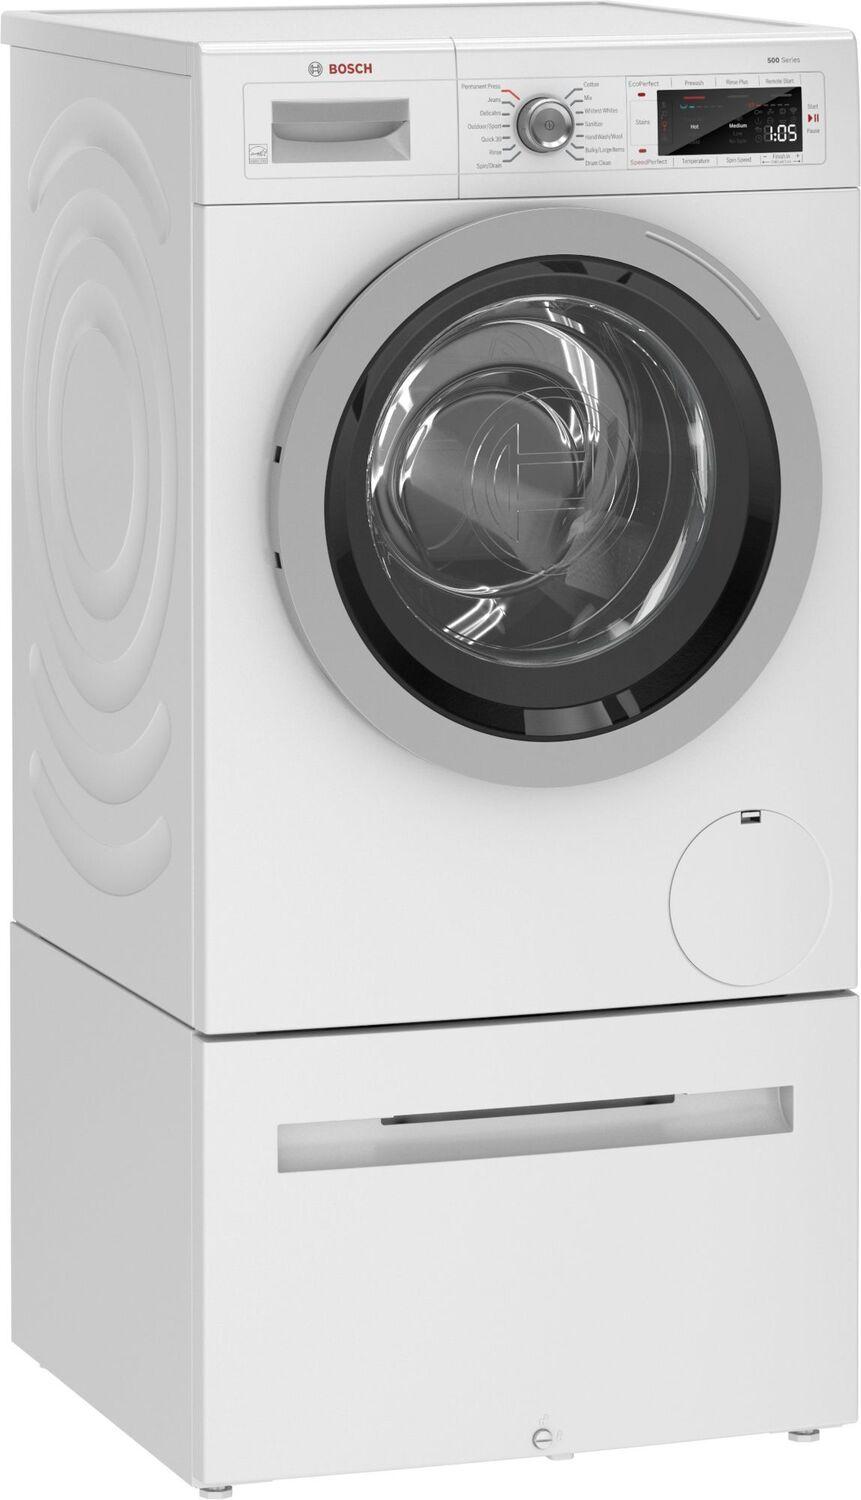 500 Series Compact Washer 1400 rpm WAW285H1UC